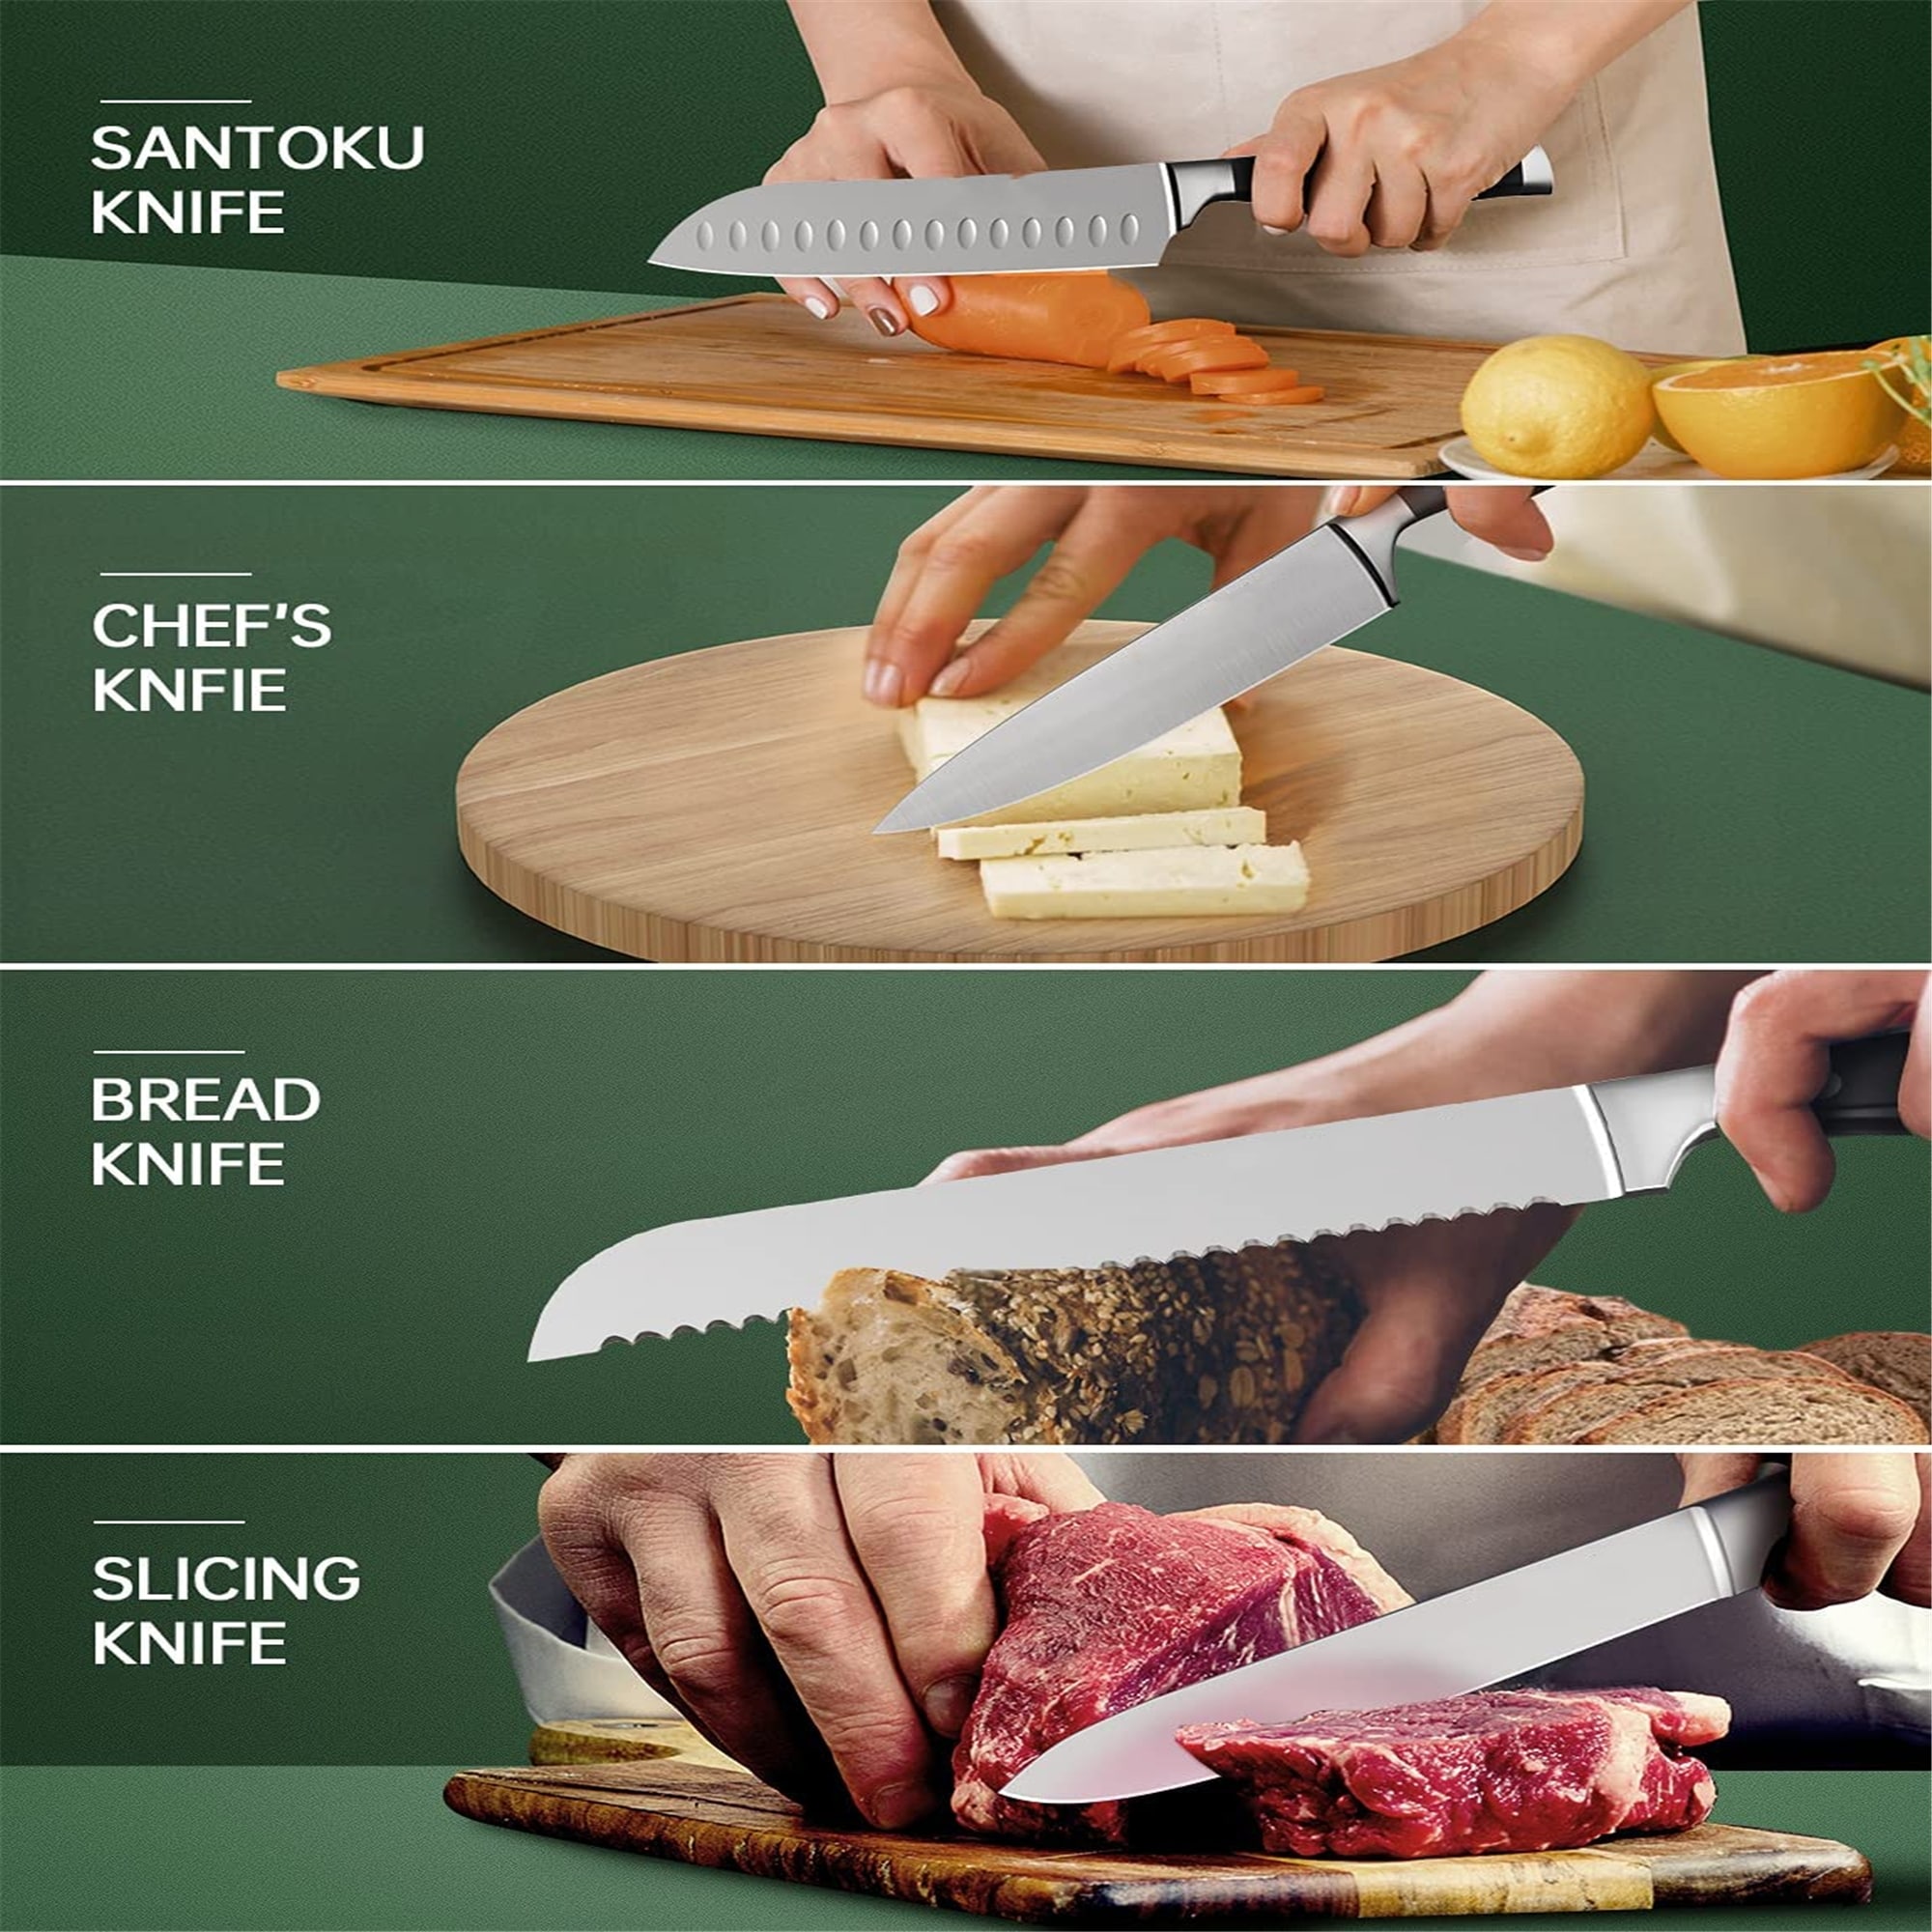 https://ak1.ostkcdn.com/images/products/is/images/direct/4f7bd2db71de1d89edd7728b6f5e94342d1093ef/Knife-Sets-for-Kitchen-with-Block%2C-17-Pcs-with-Boning-Knife-and-Carving-Fork%2Cwith-German-Stainless-Steel-and-Full-Tang-Design.jpg